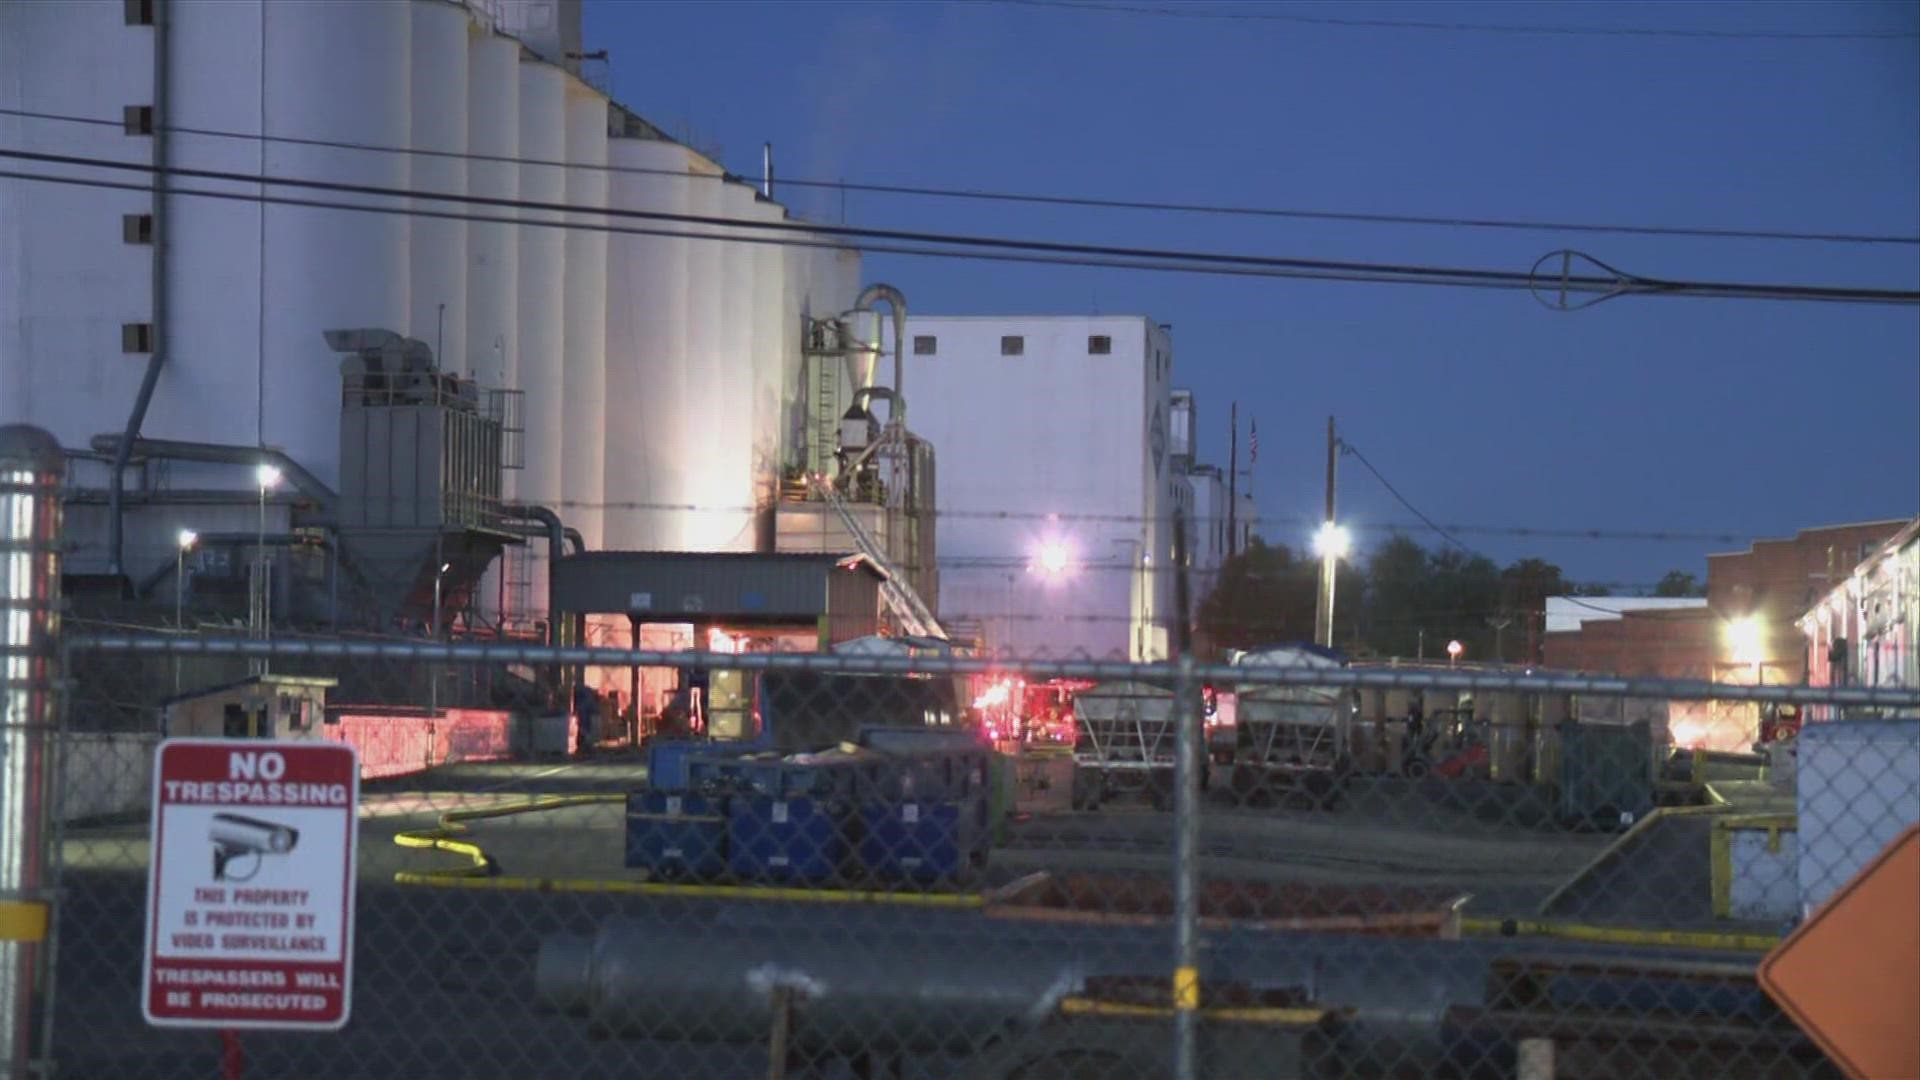 Around 2 a.m. Friday firefighters responded to a small fire in a dust collector and a holding bay at the Blue Diamond Factory.